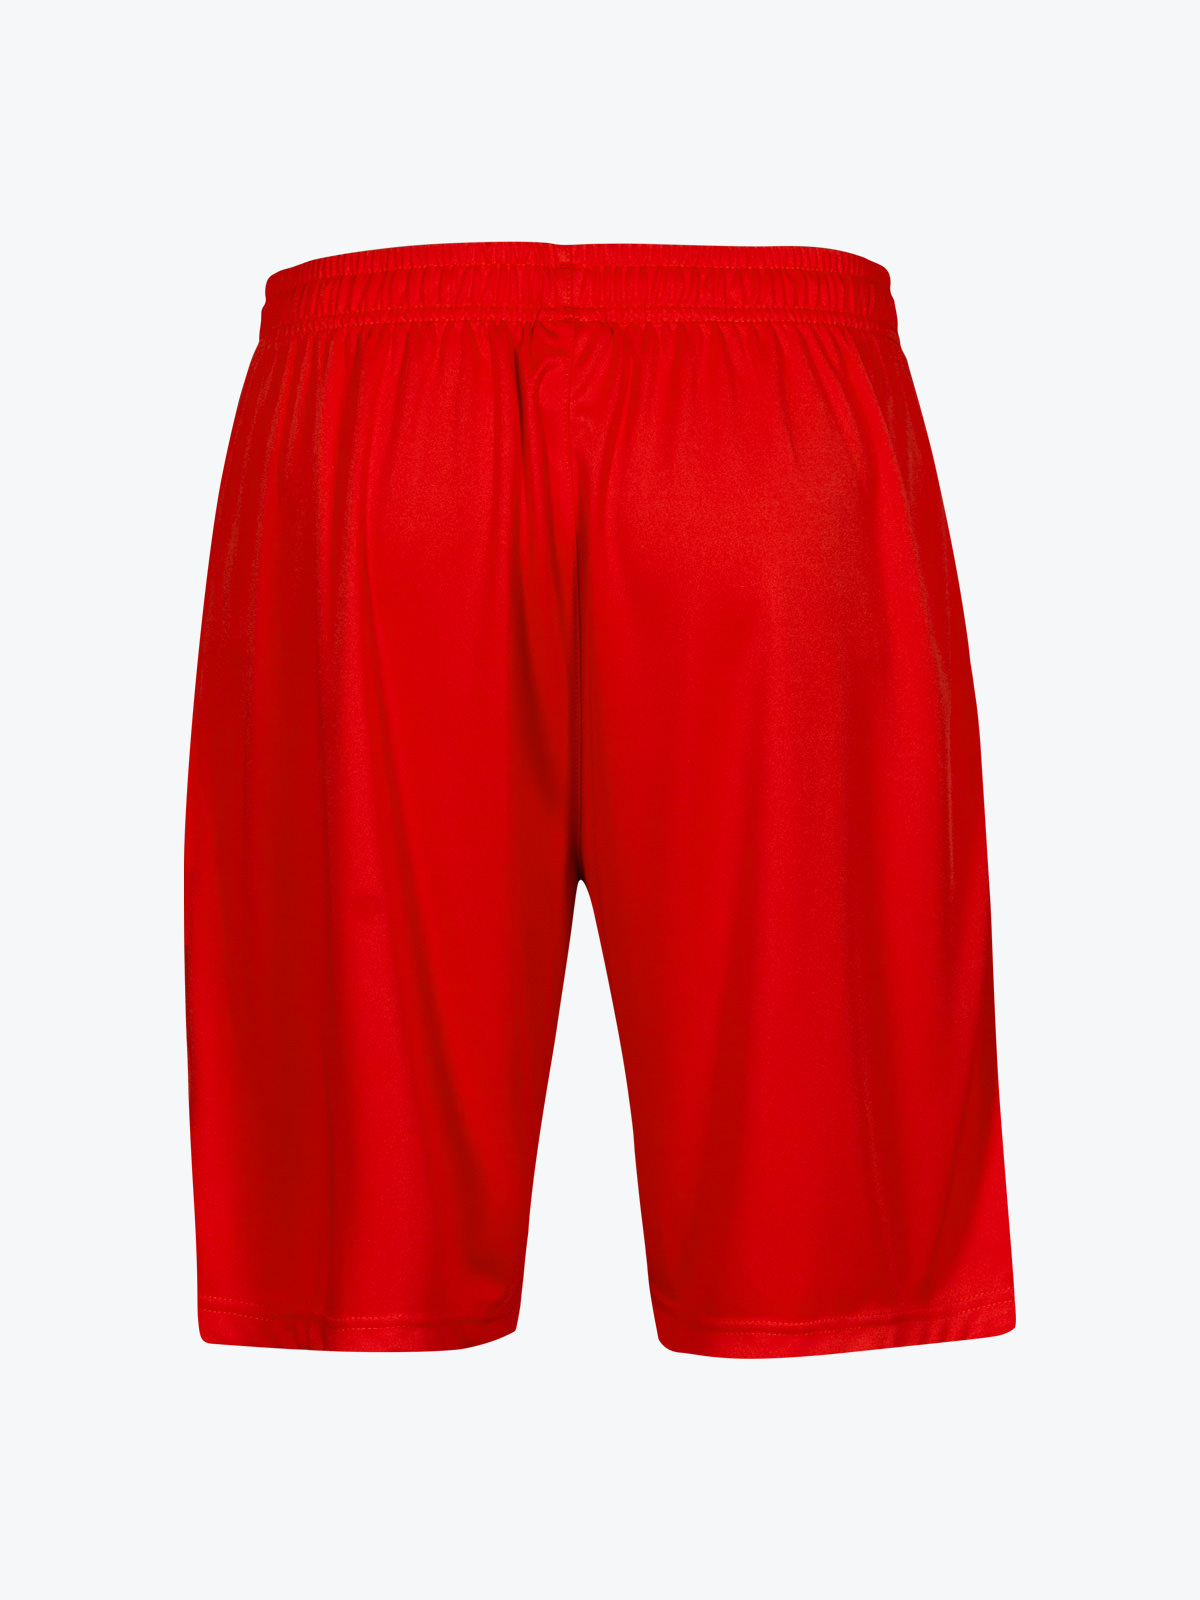 picture of focus inter short - red